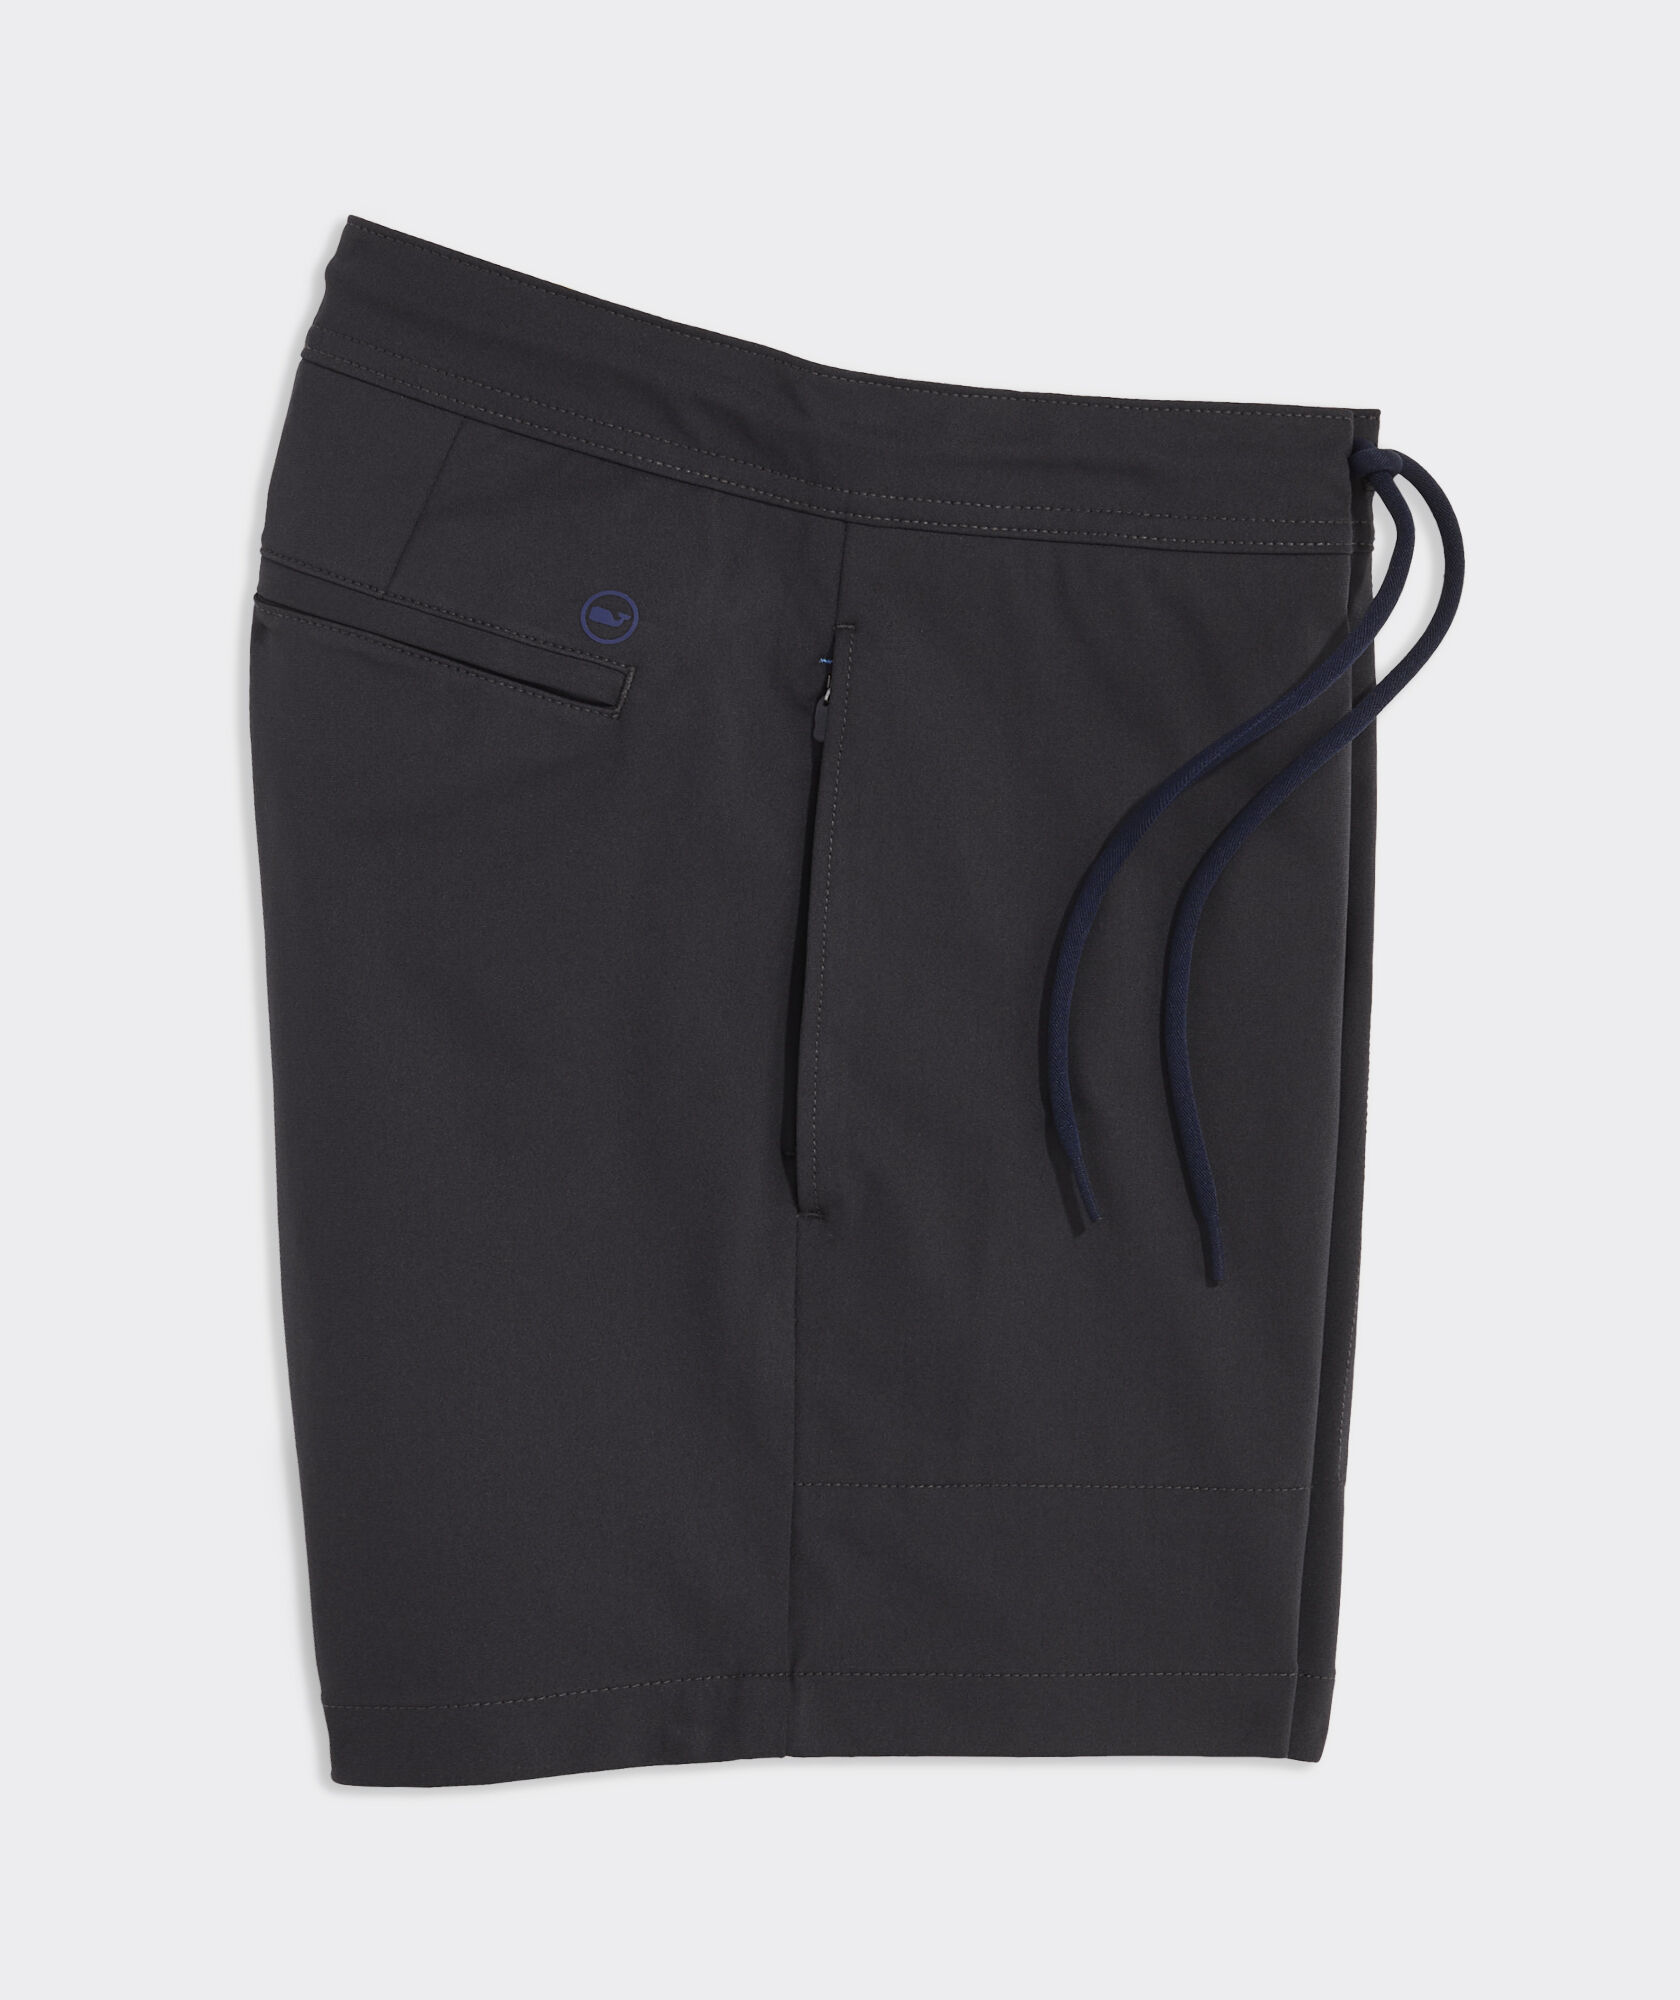 7 Inch On-The-Go Warp Knit Performance Shorts